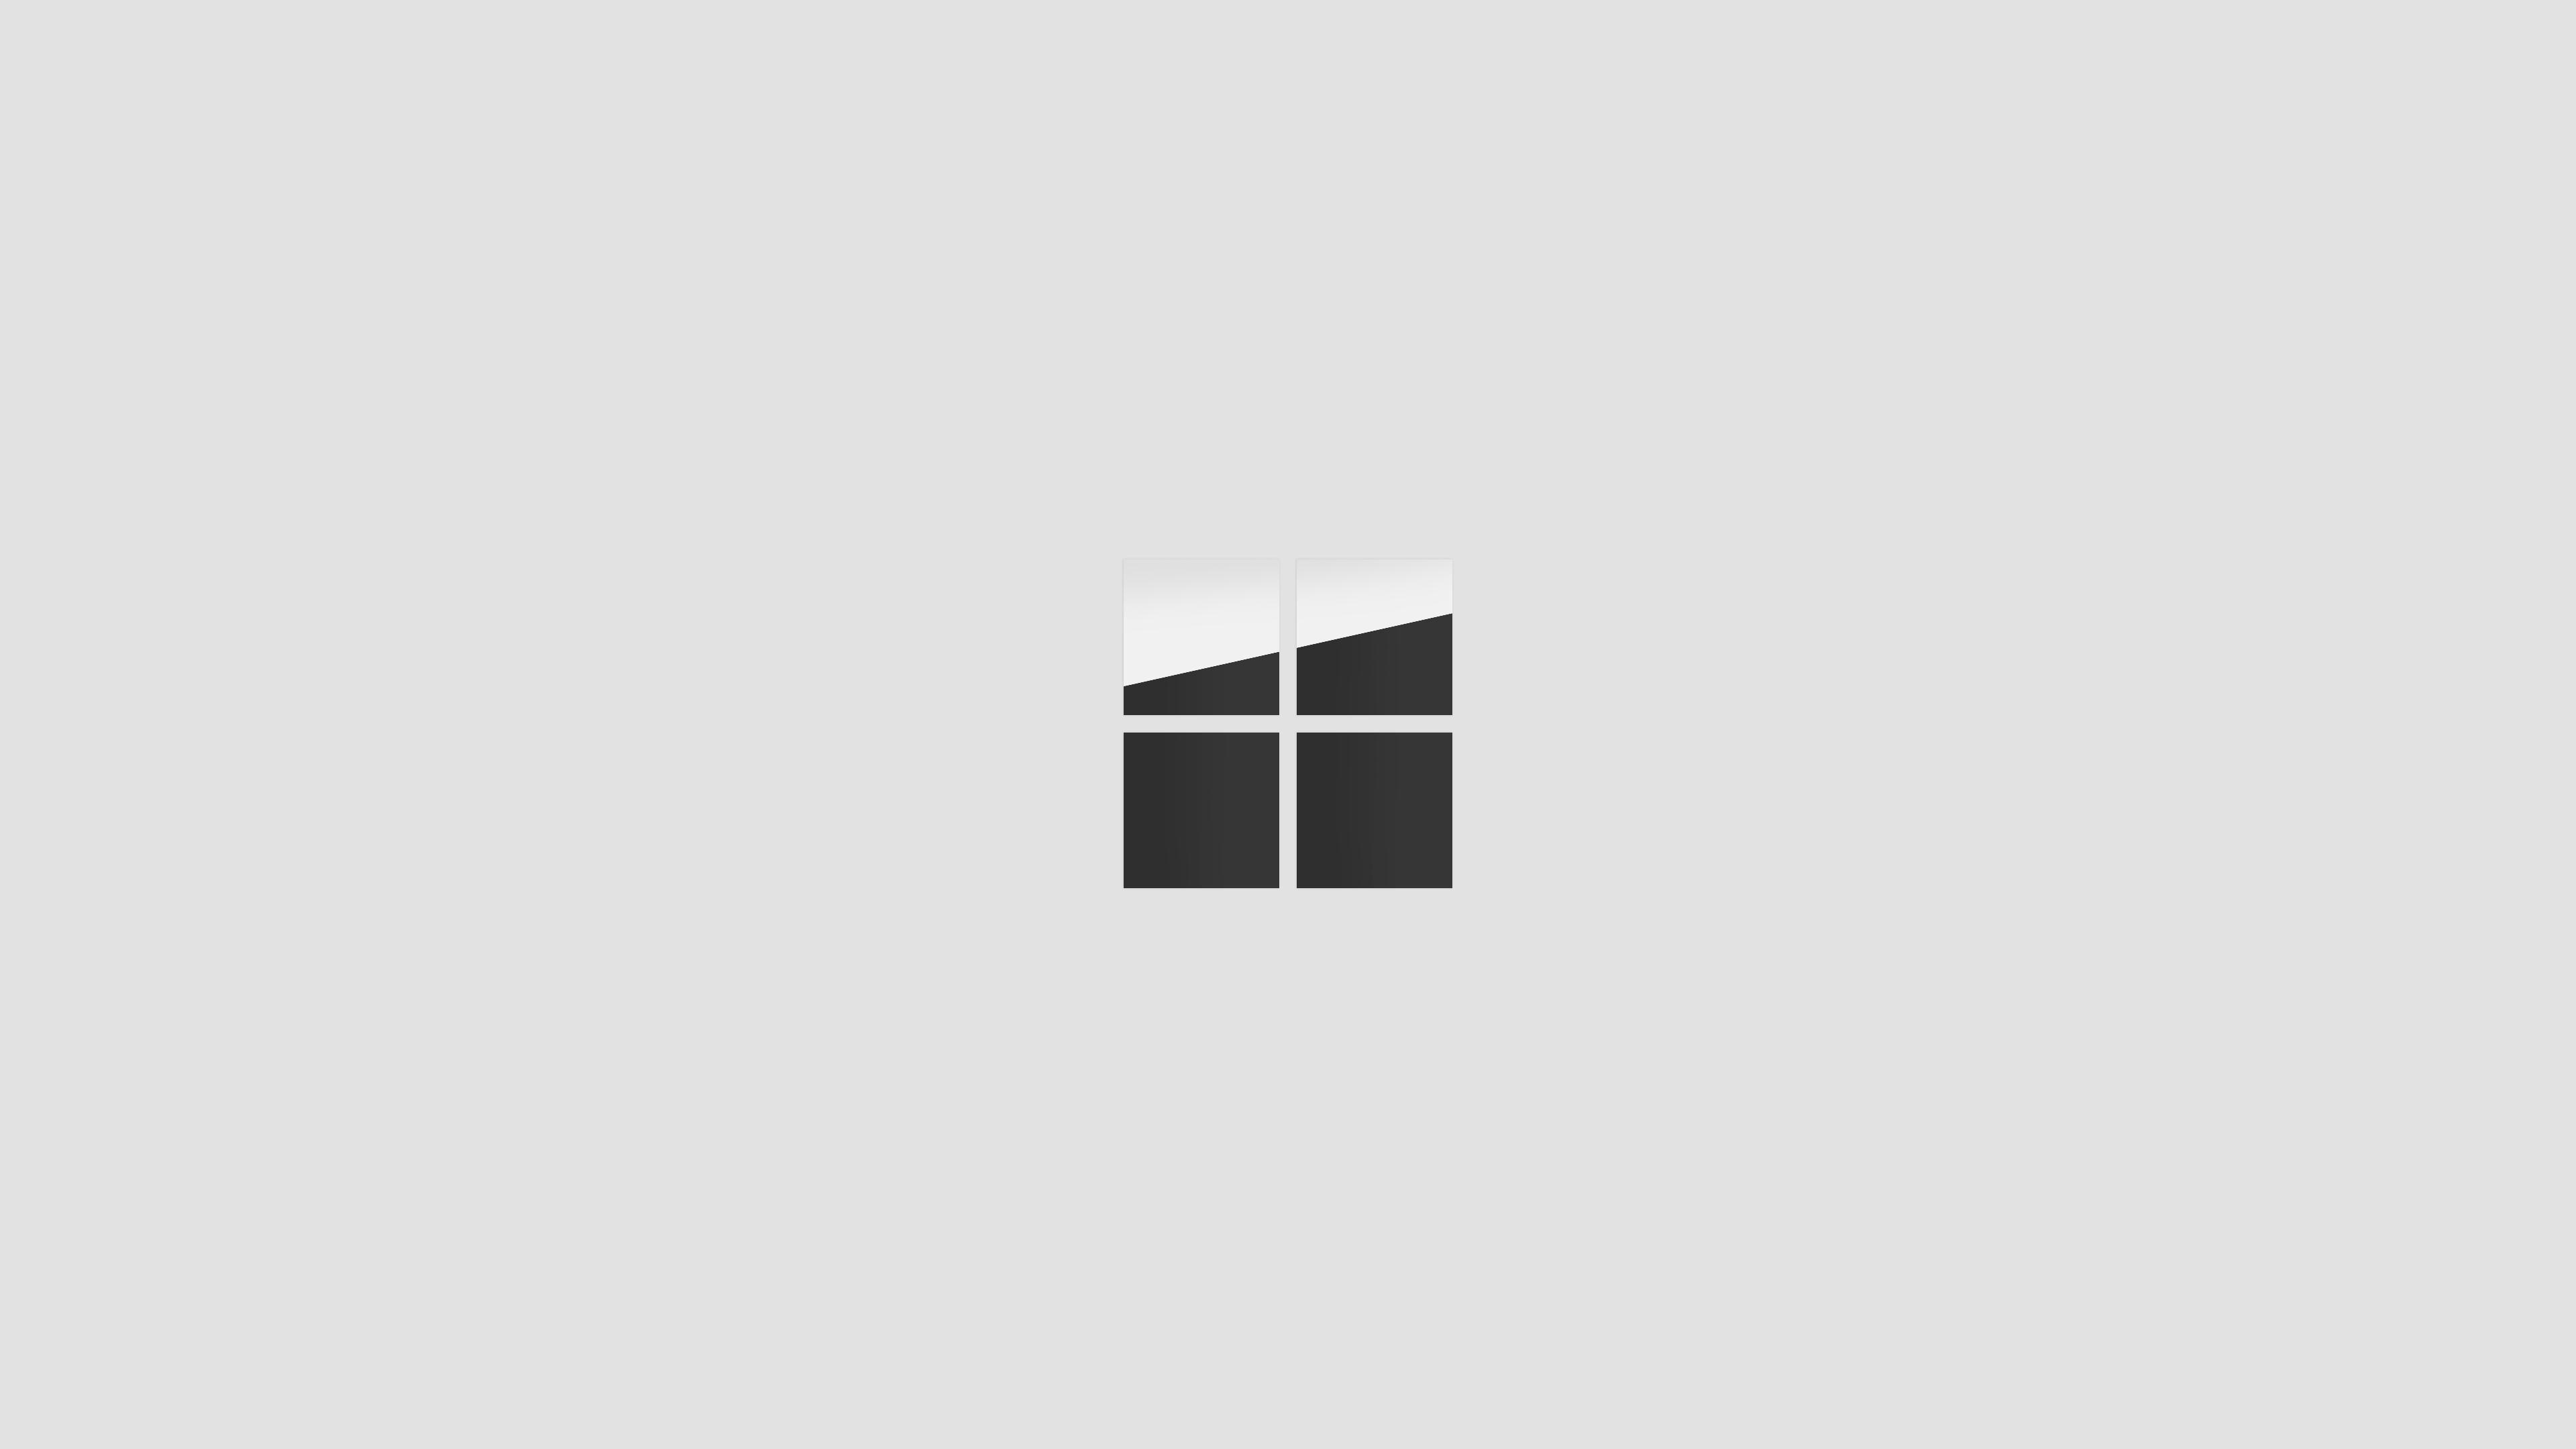 Official Microsoft Surface Logo - Have made a 4K adapted version of Microsoft Surface logo which is ...